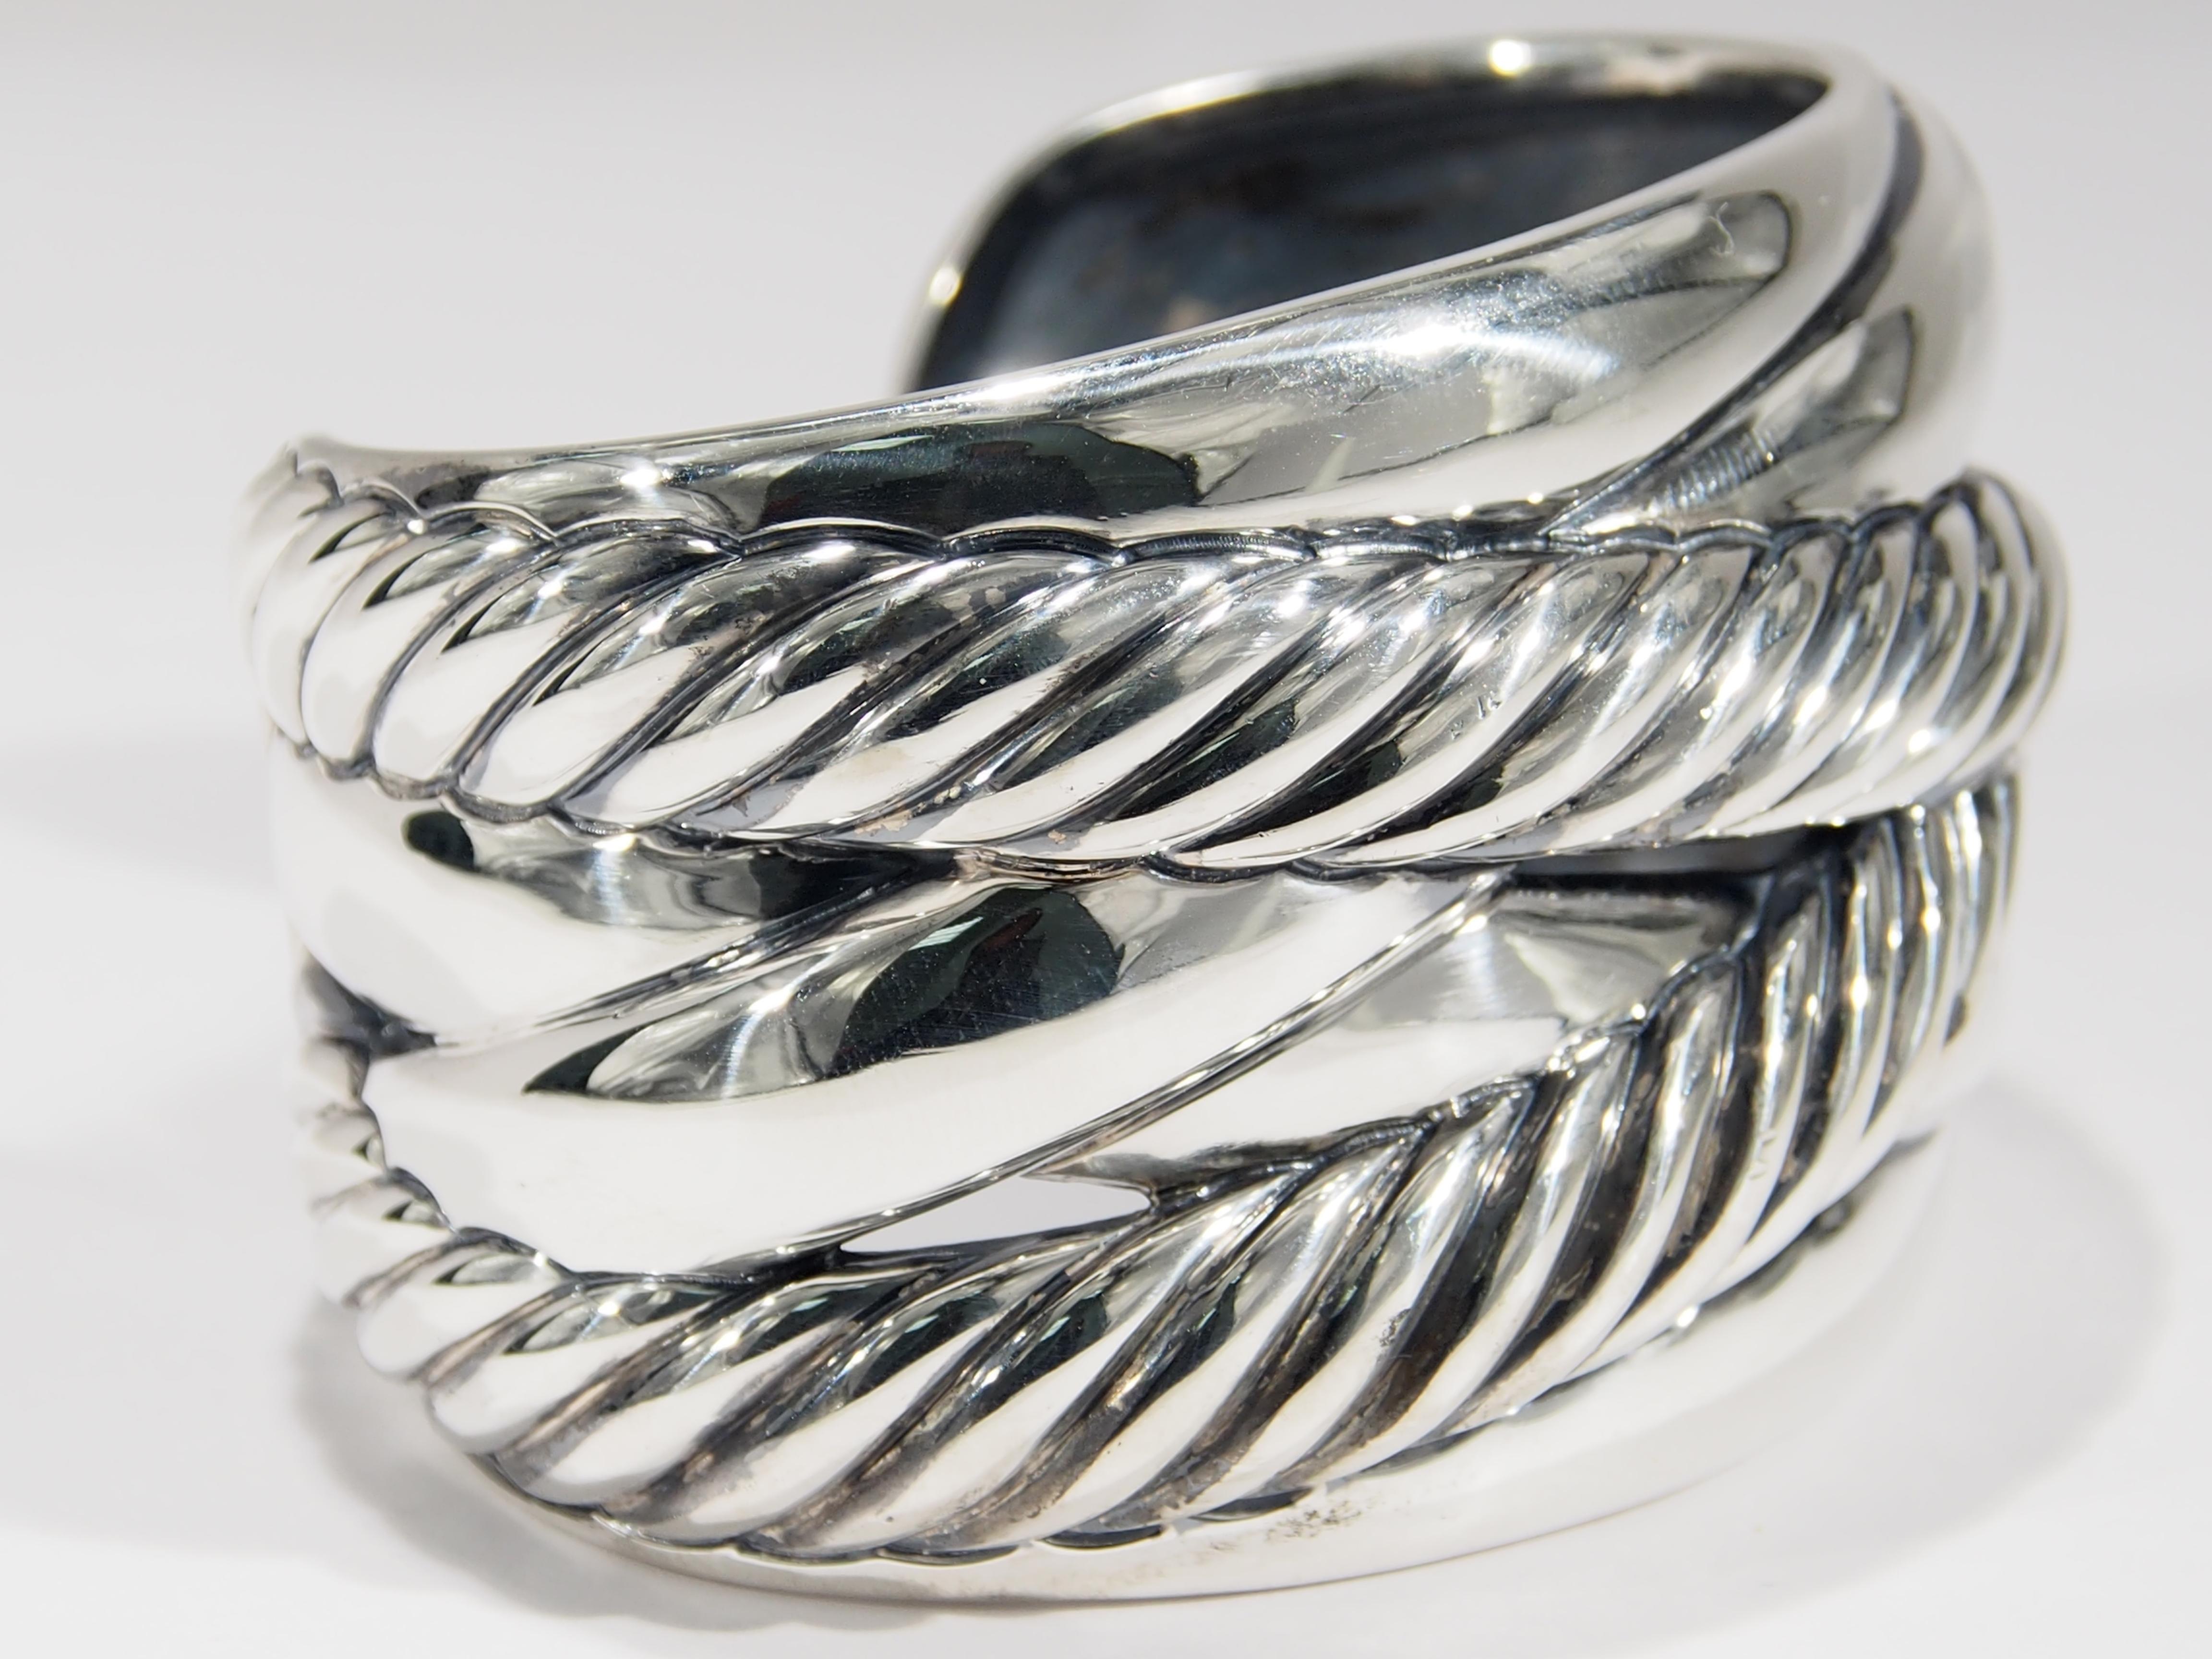 From one of America's favorite jewelry designers, David Yurman is this Sterling Silver Wide Cuff. The Bracelet is 1 3/4 inches in Width featuring cross over rope over smooth bands. Definitely a statement Bracelet to be enjoyed everyday, it measures